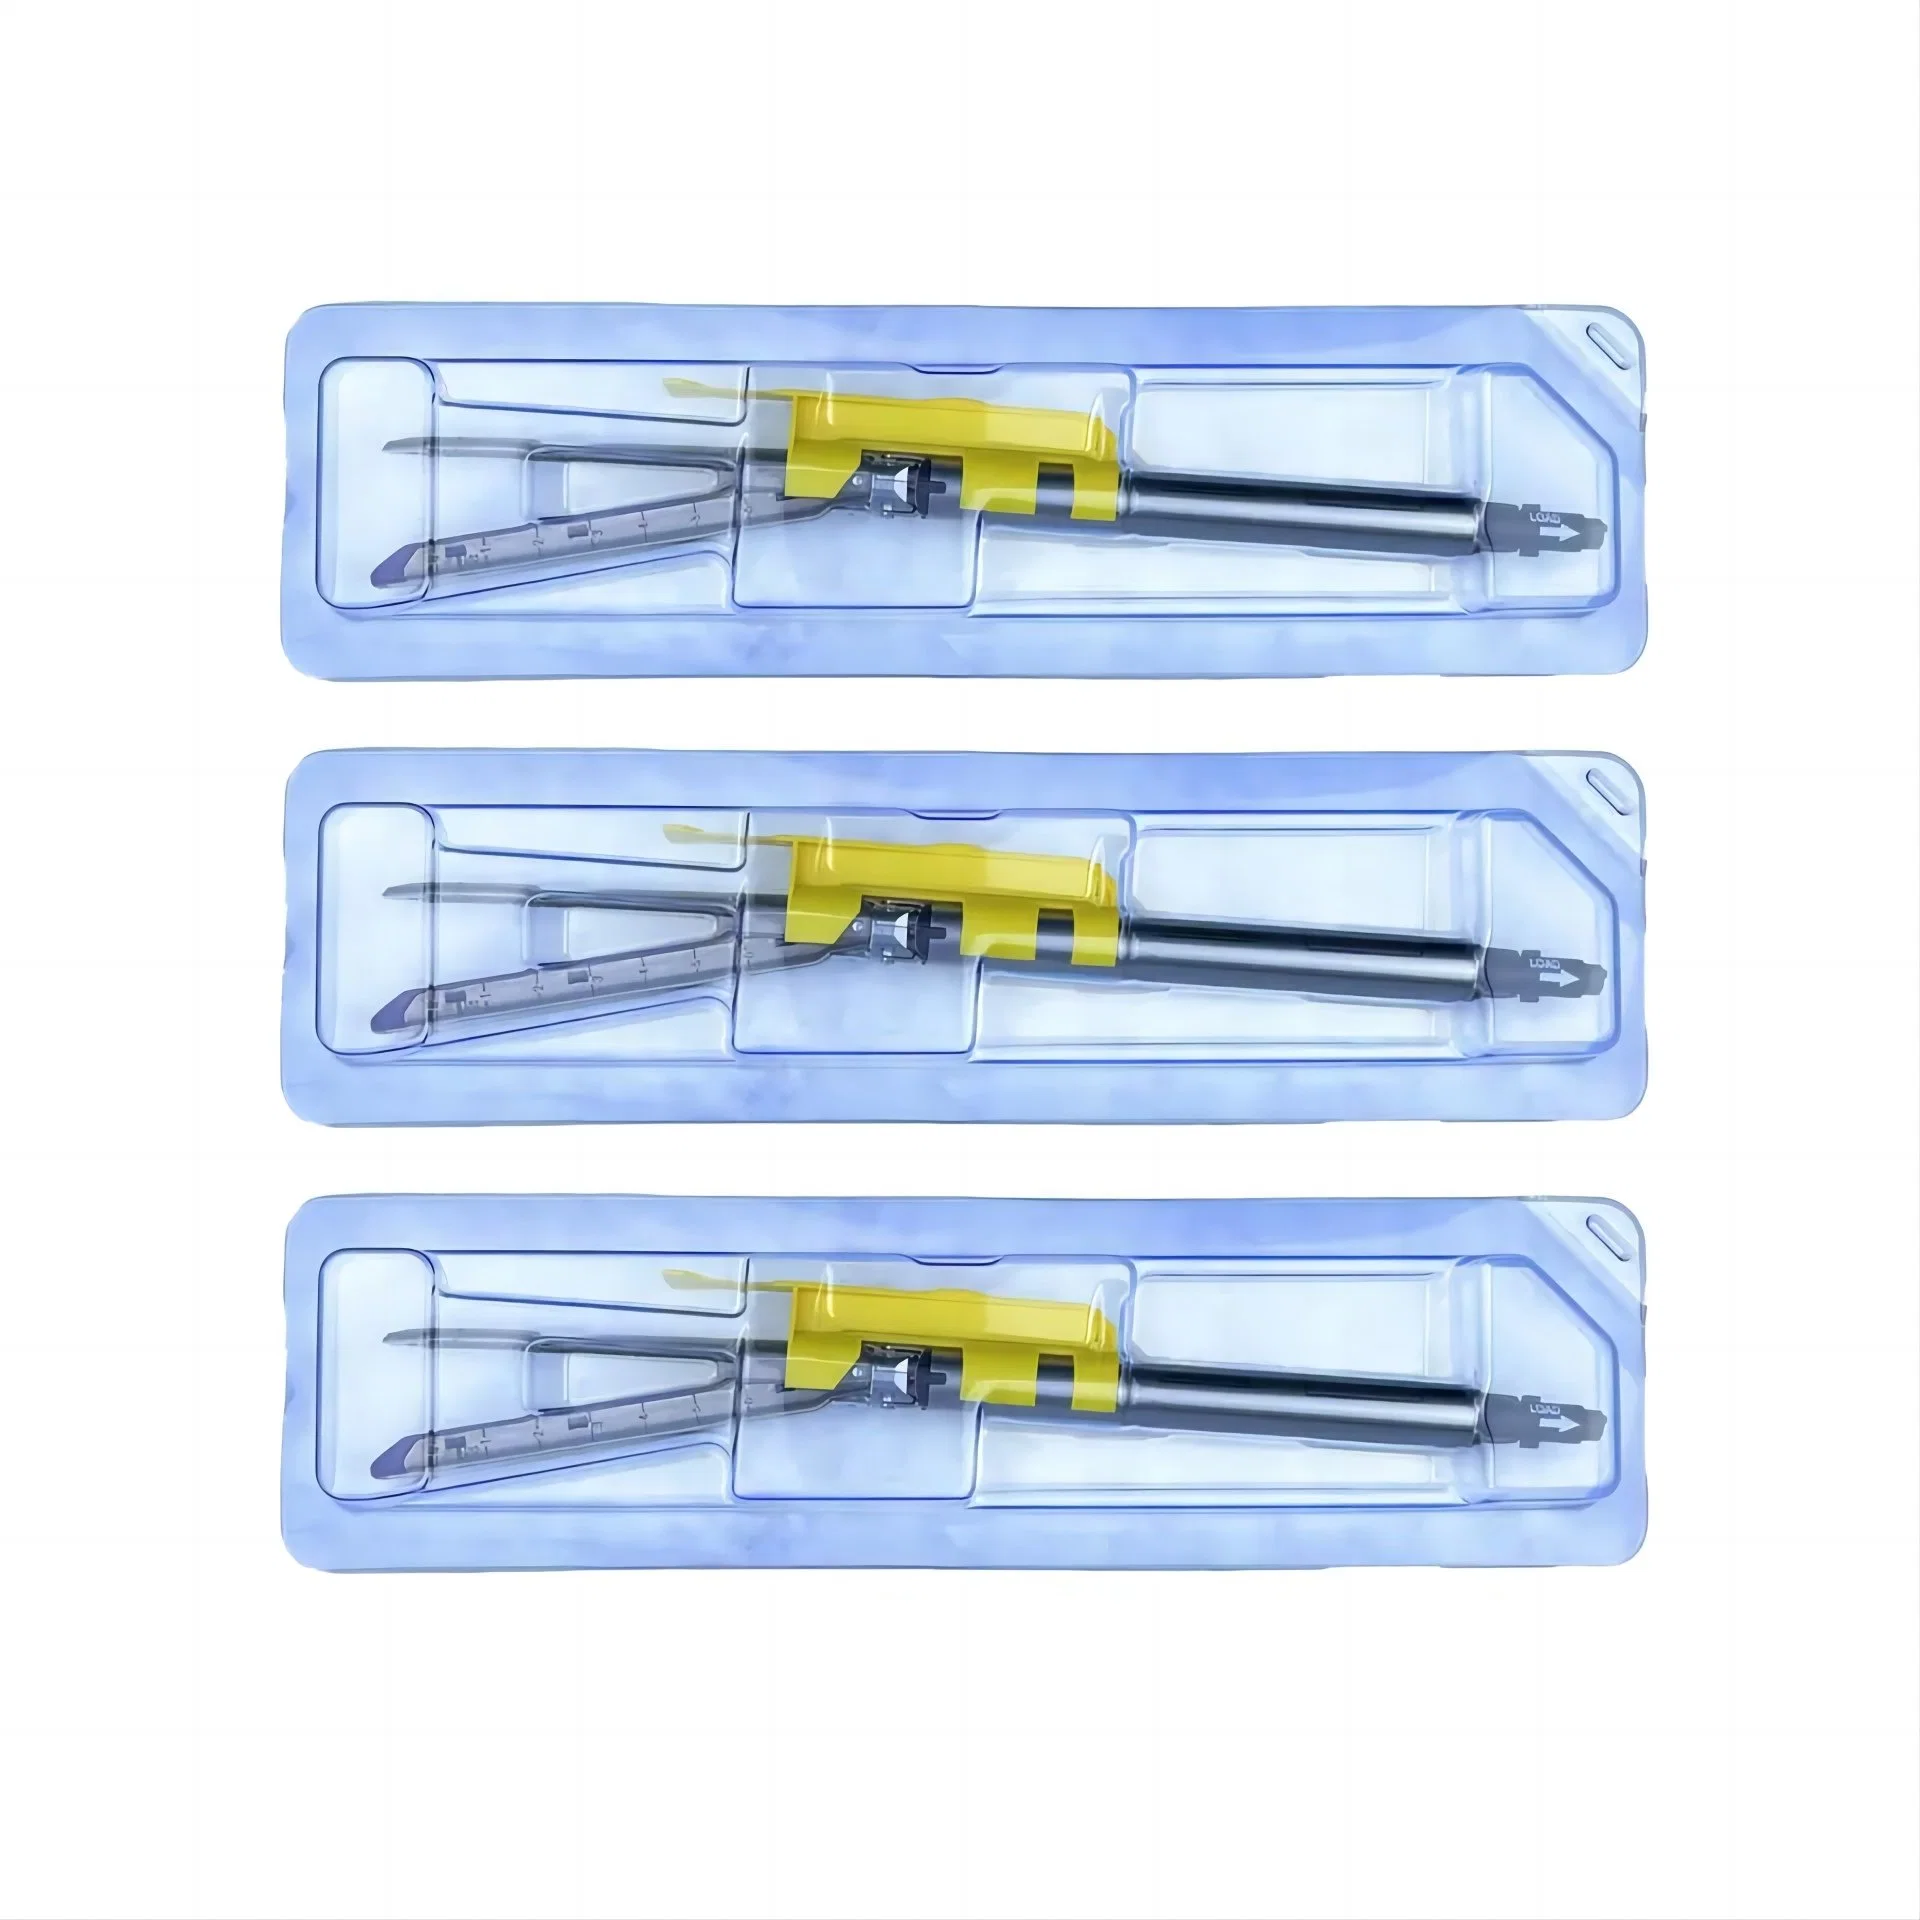 Medical Surgical Endo Linear Cutter Stapler Reloads for Surgery